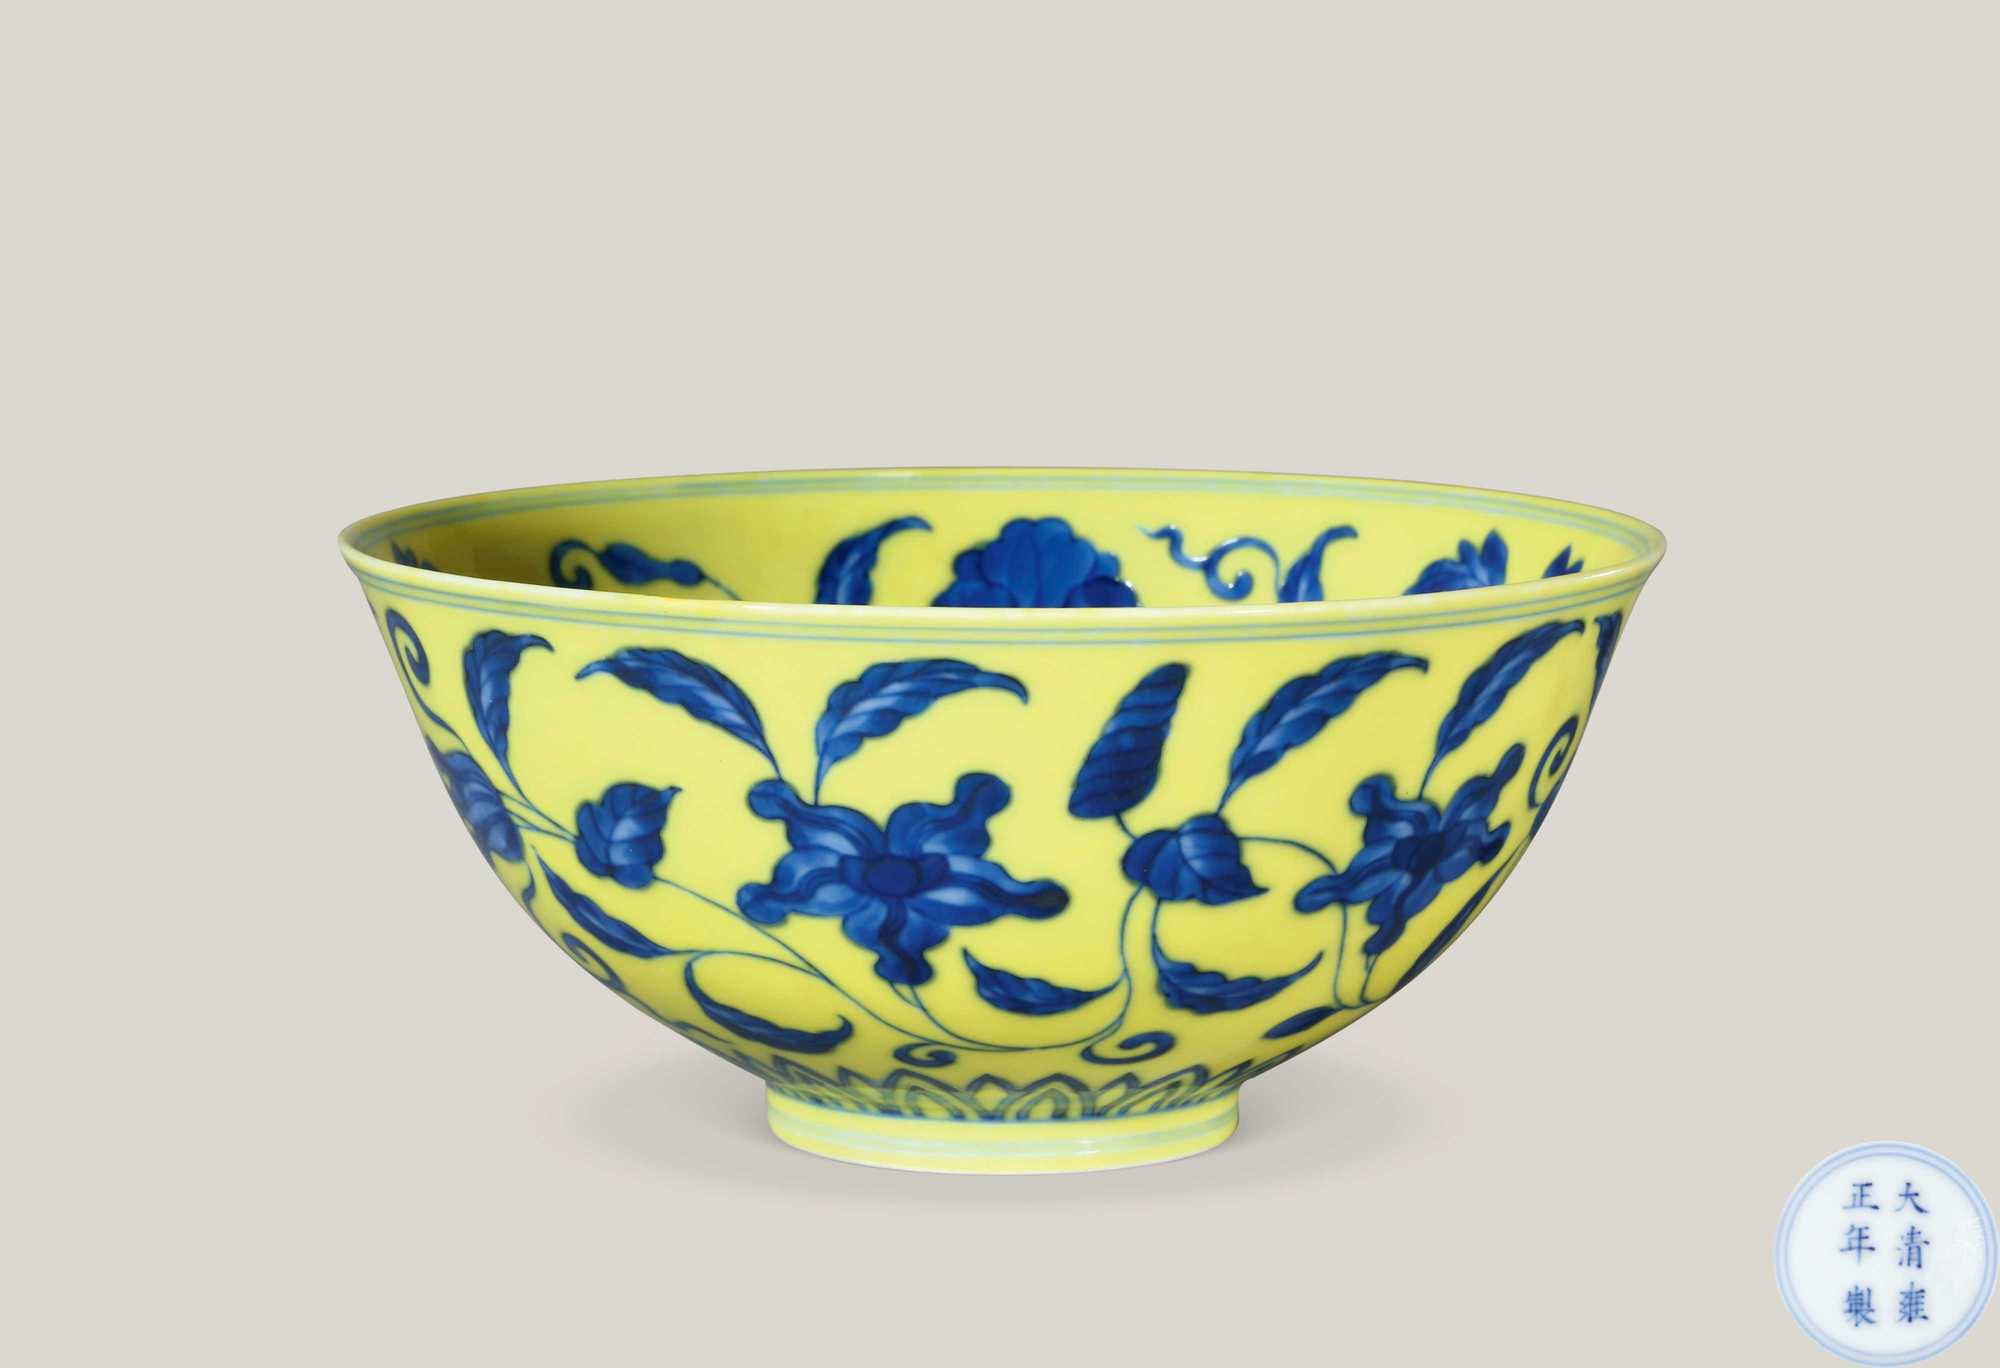 A CHENGHUA-IMITATION YELLOW-GROUND BLUE AND WHITE‘FLORAL’BOWL